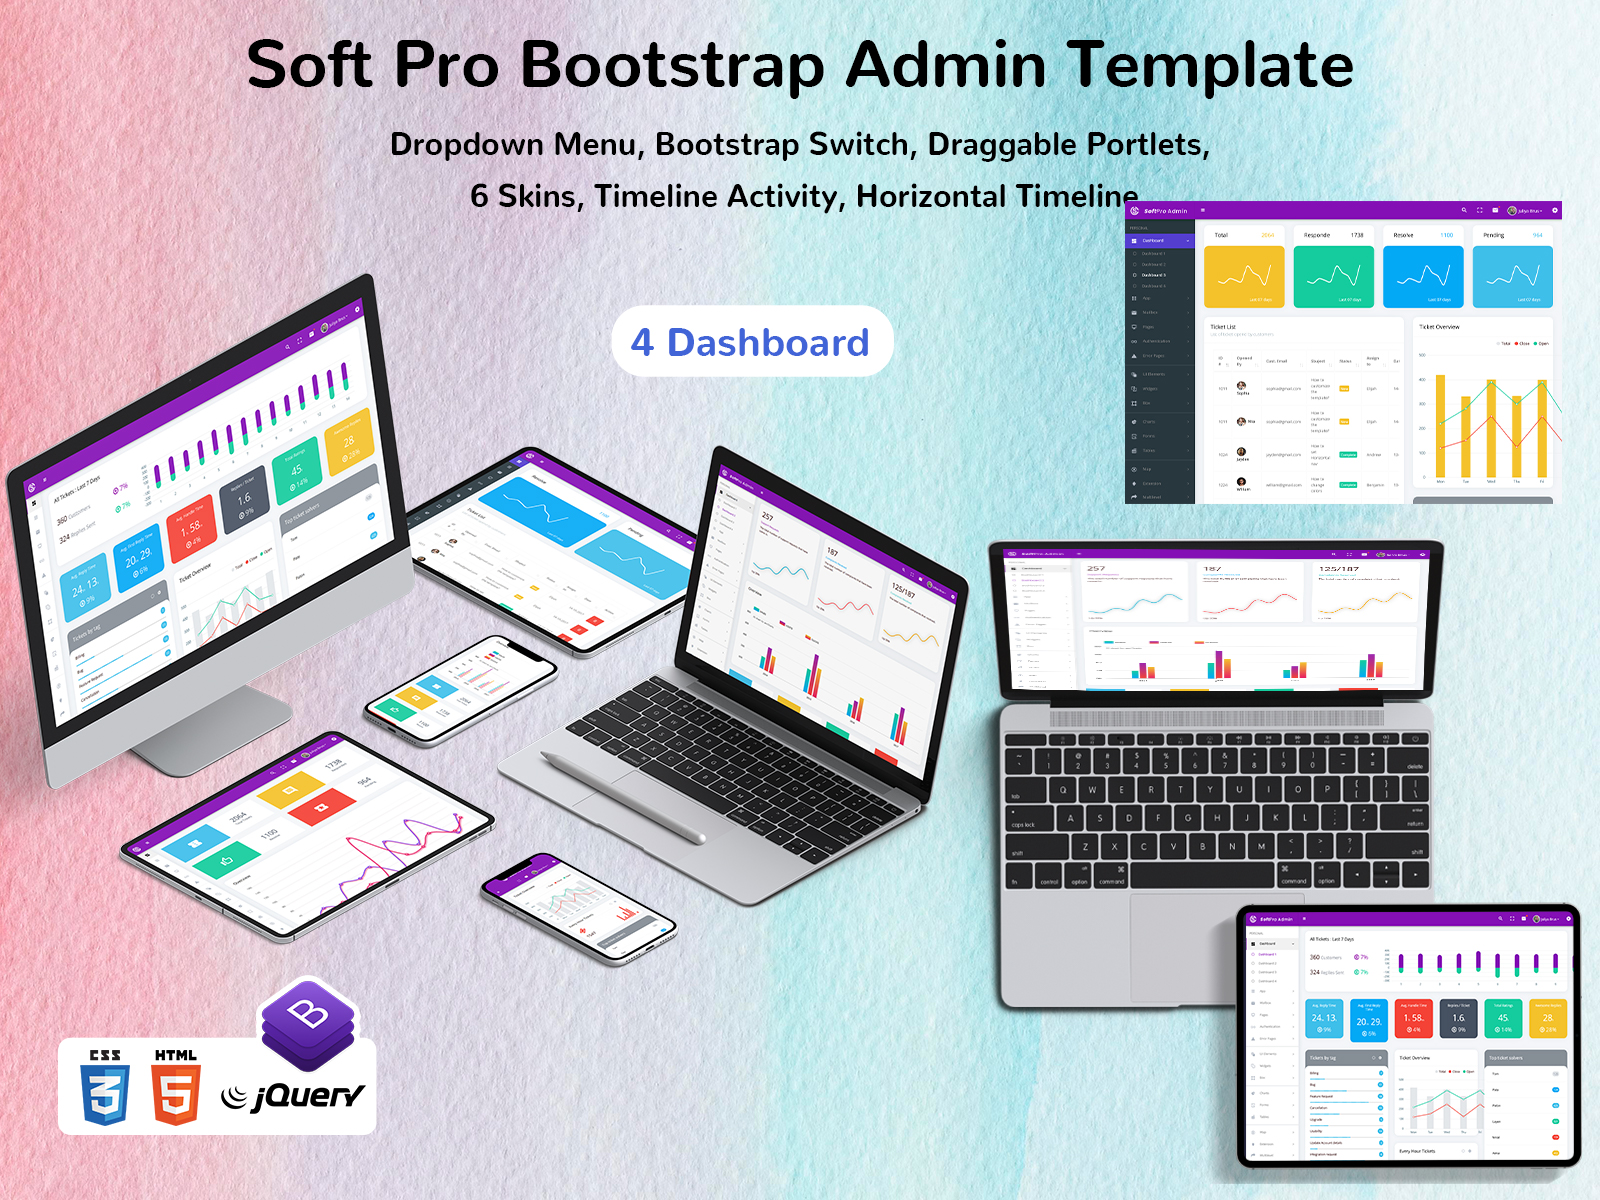 Bootstrap Admin Web App And Admin Panel Dashboard – Soft Pro